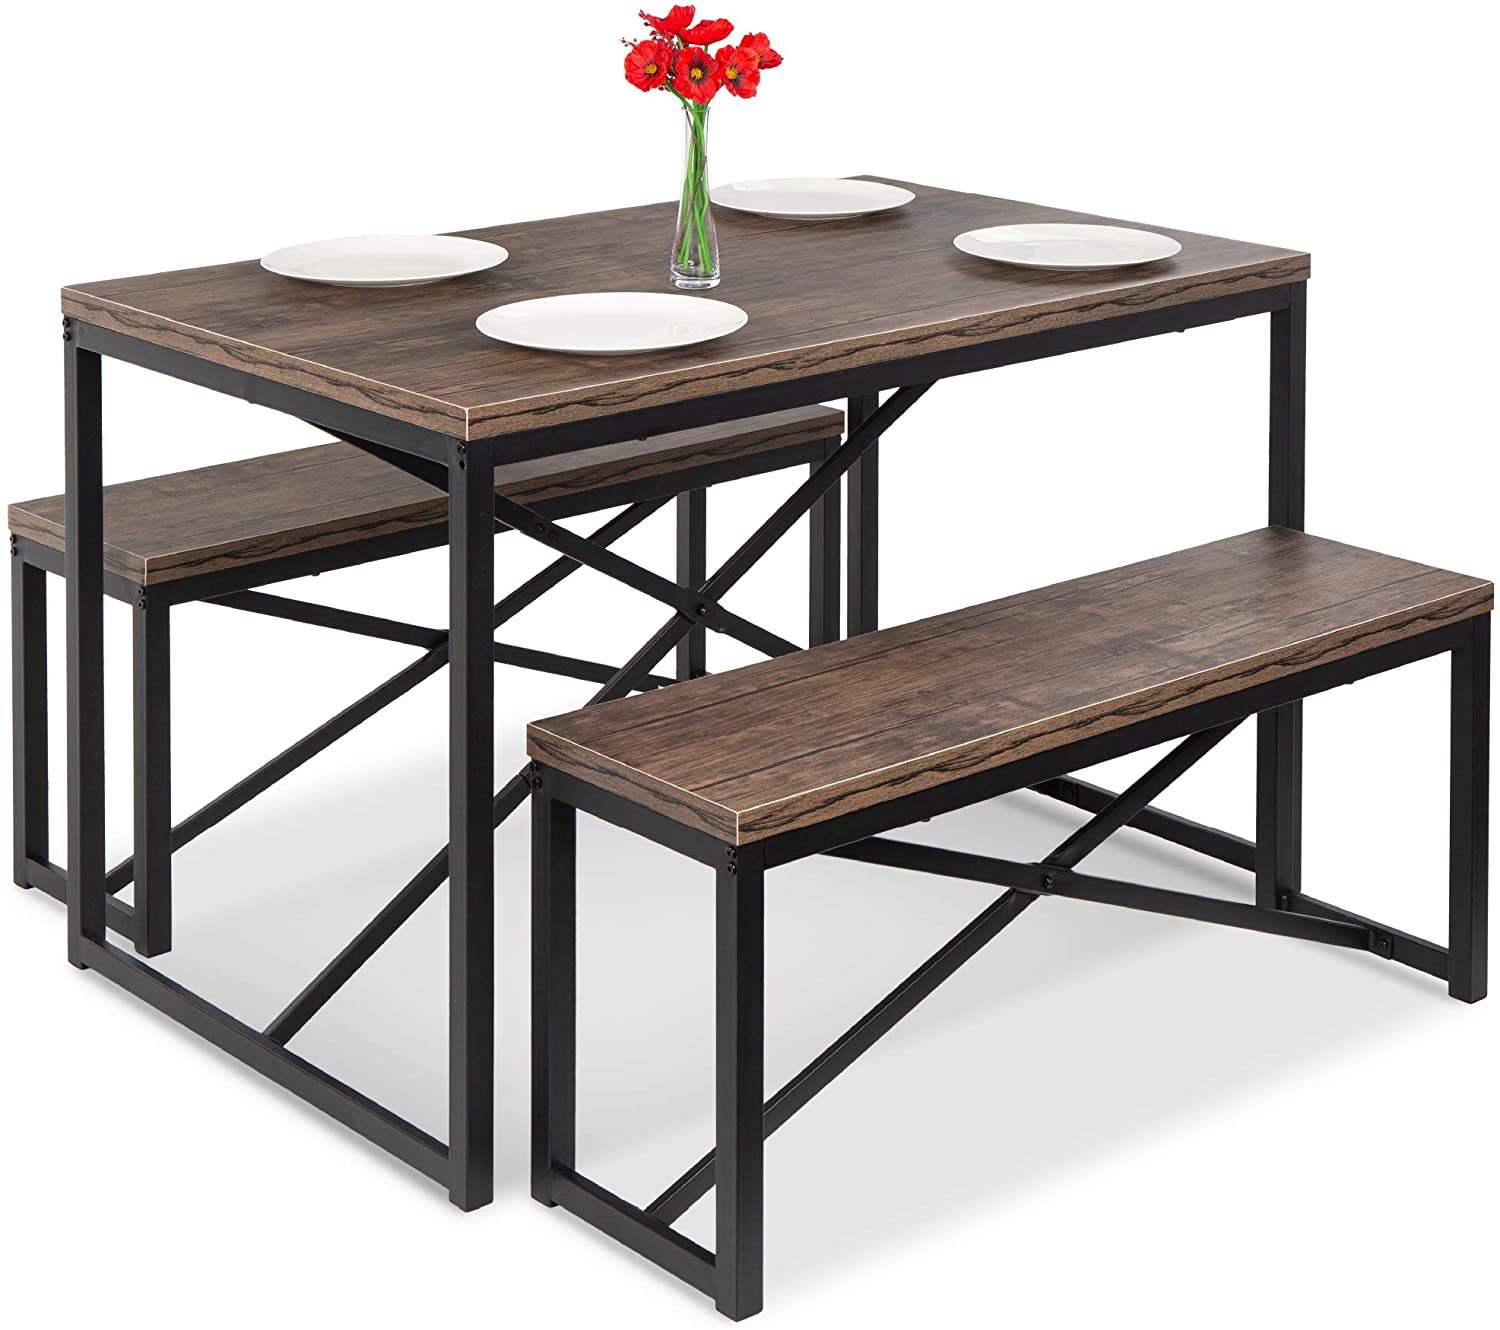 4-person Space-saving Dinette For Kitchen Dining Room W/ 2 Benches Table – Brown/black Home Furniture Wooden Modern